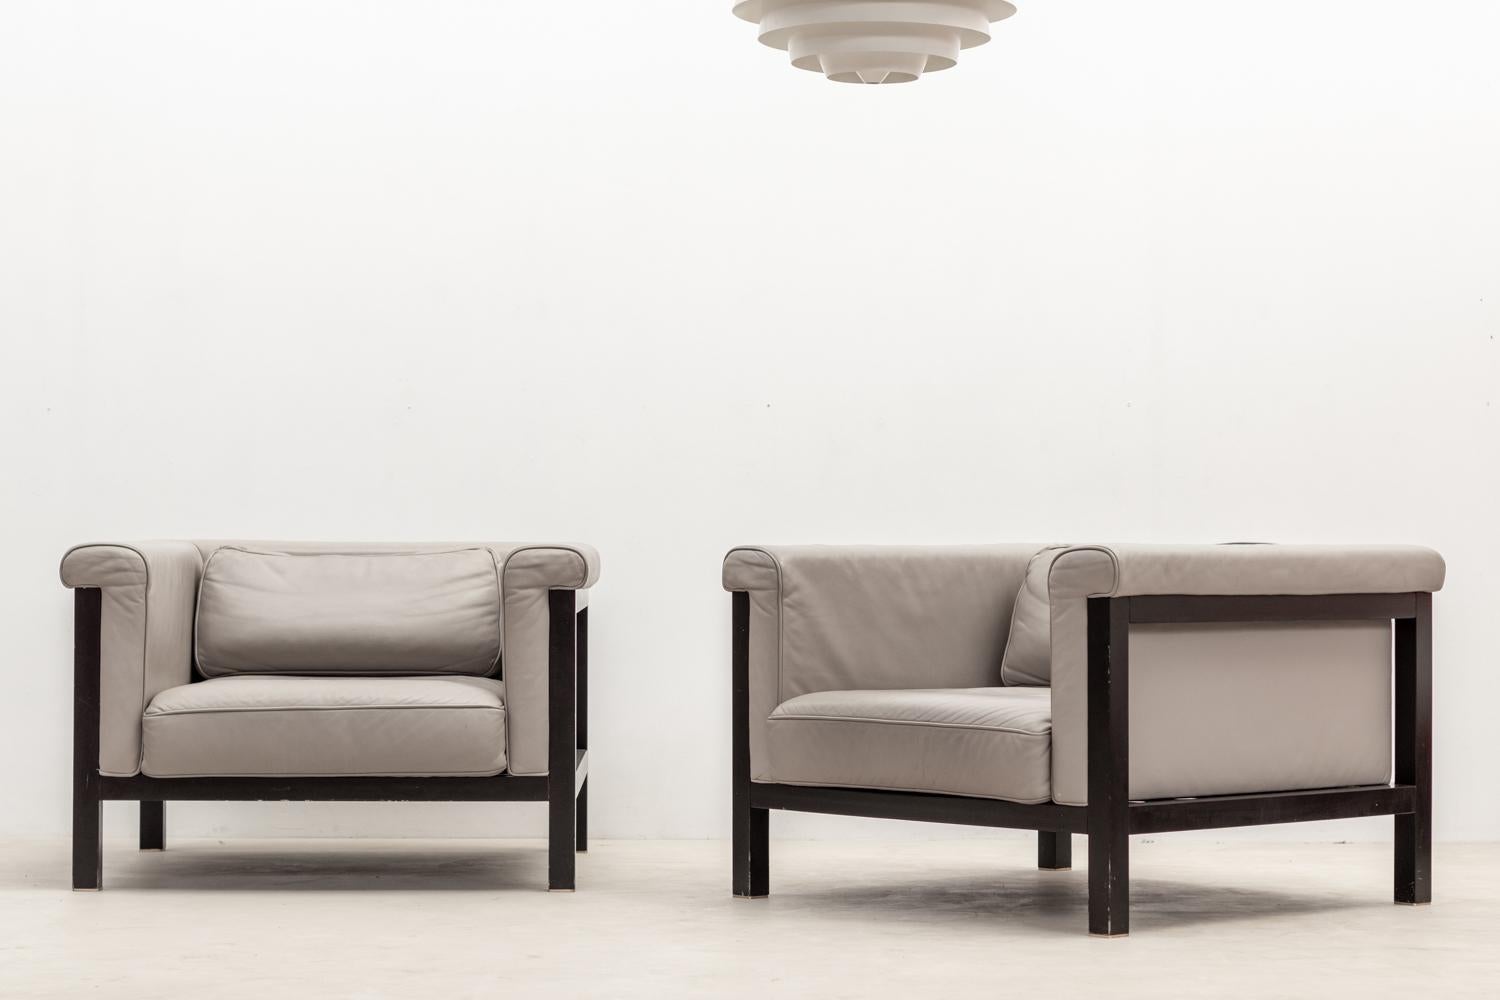 Large club designed by the renowned Belgian designer Jules Wabbes and produced by BULO in 2010 is a testament to timeless elegance.
Draped in a luxurious light grey leather upholstery as inviting as it is stylish. The leather's softness beckon you